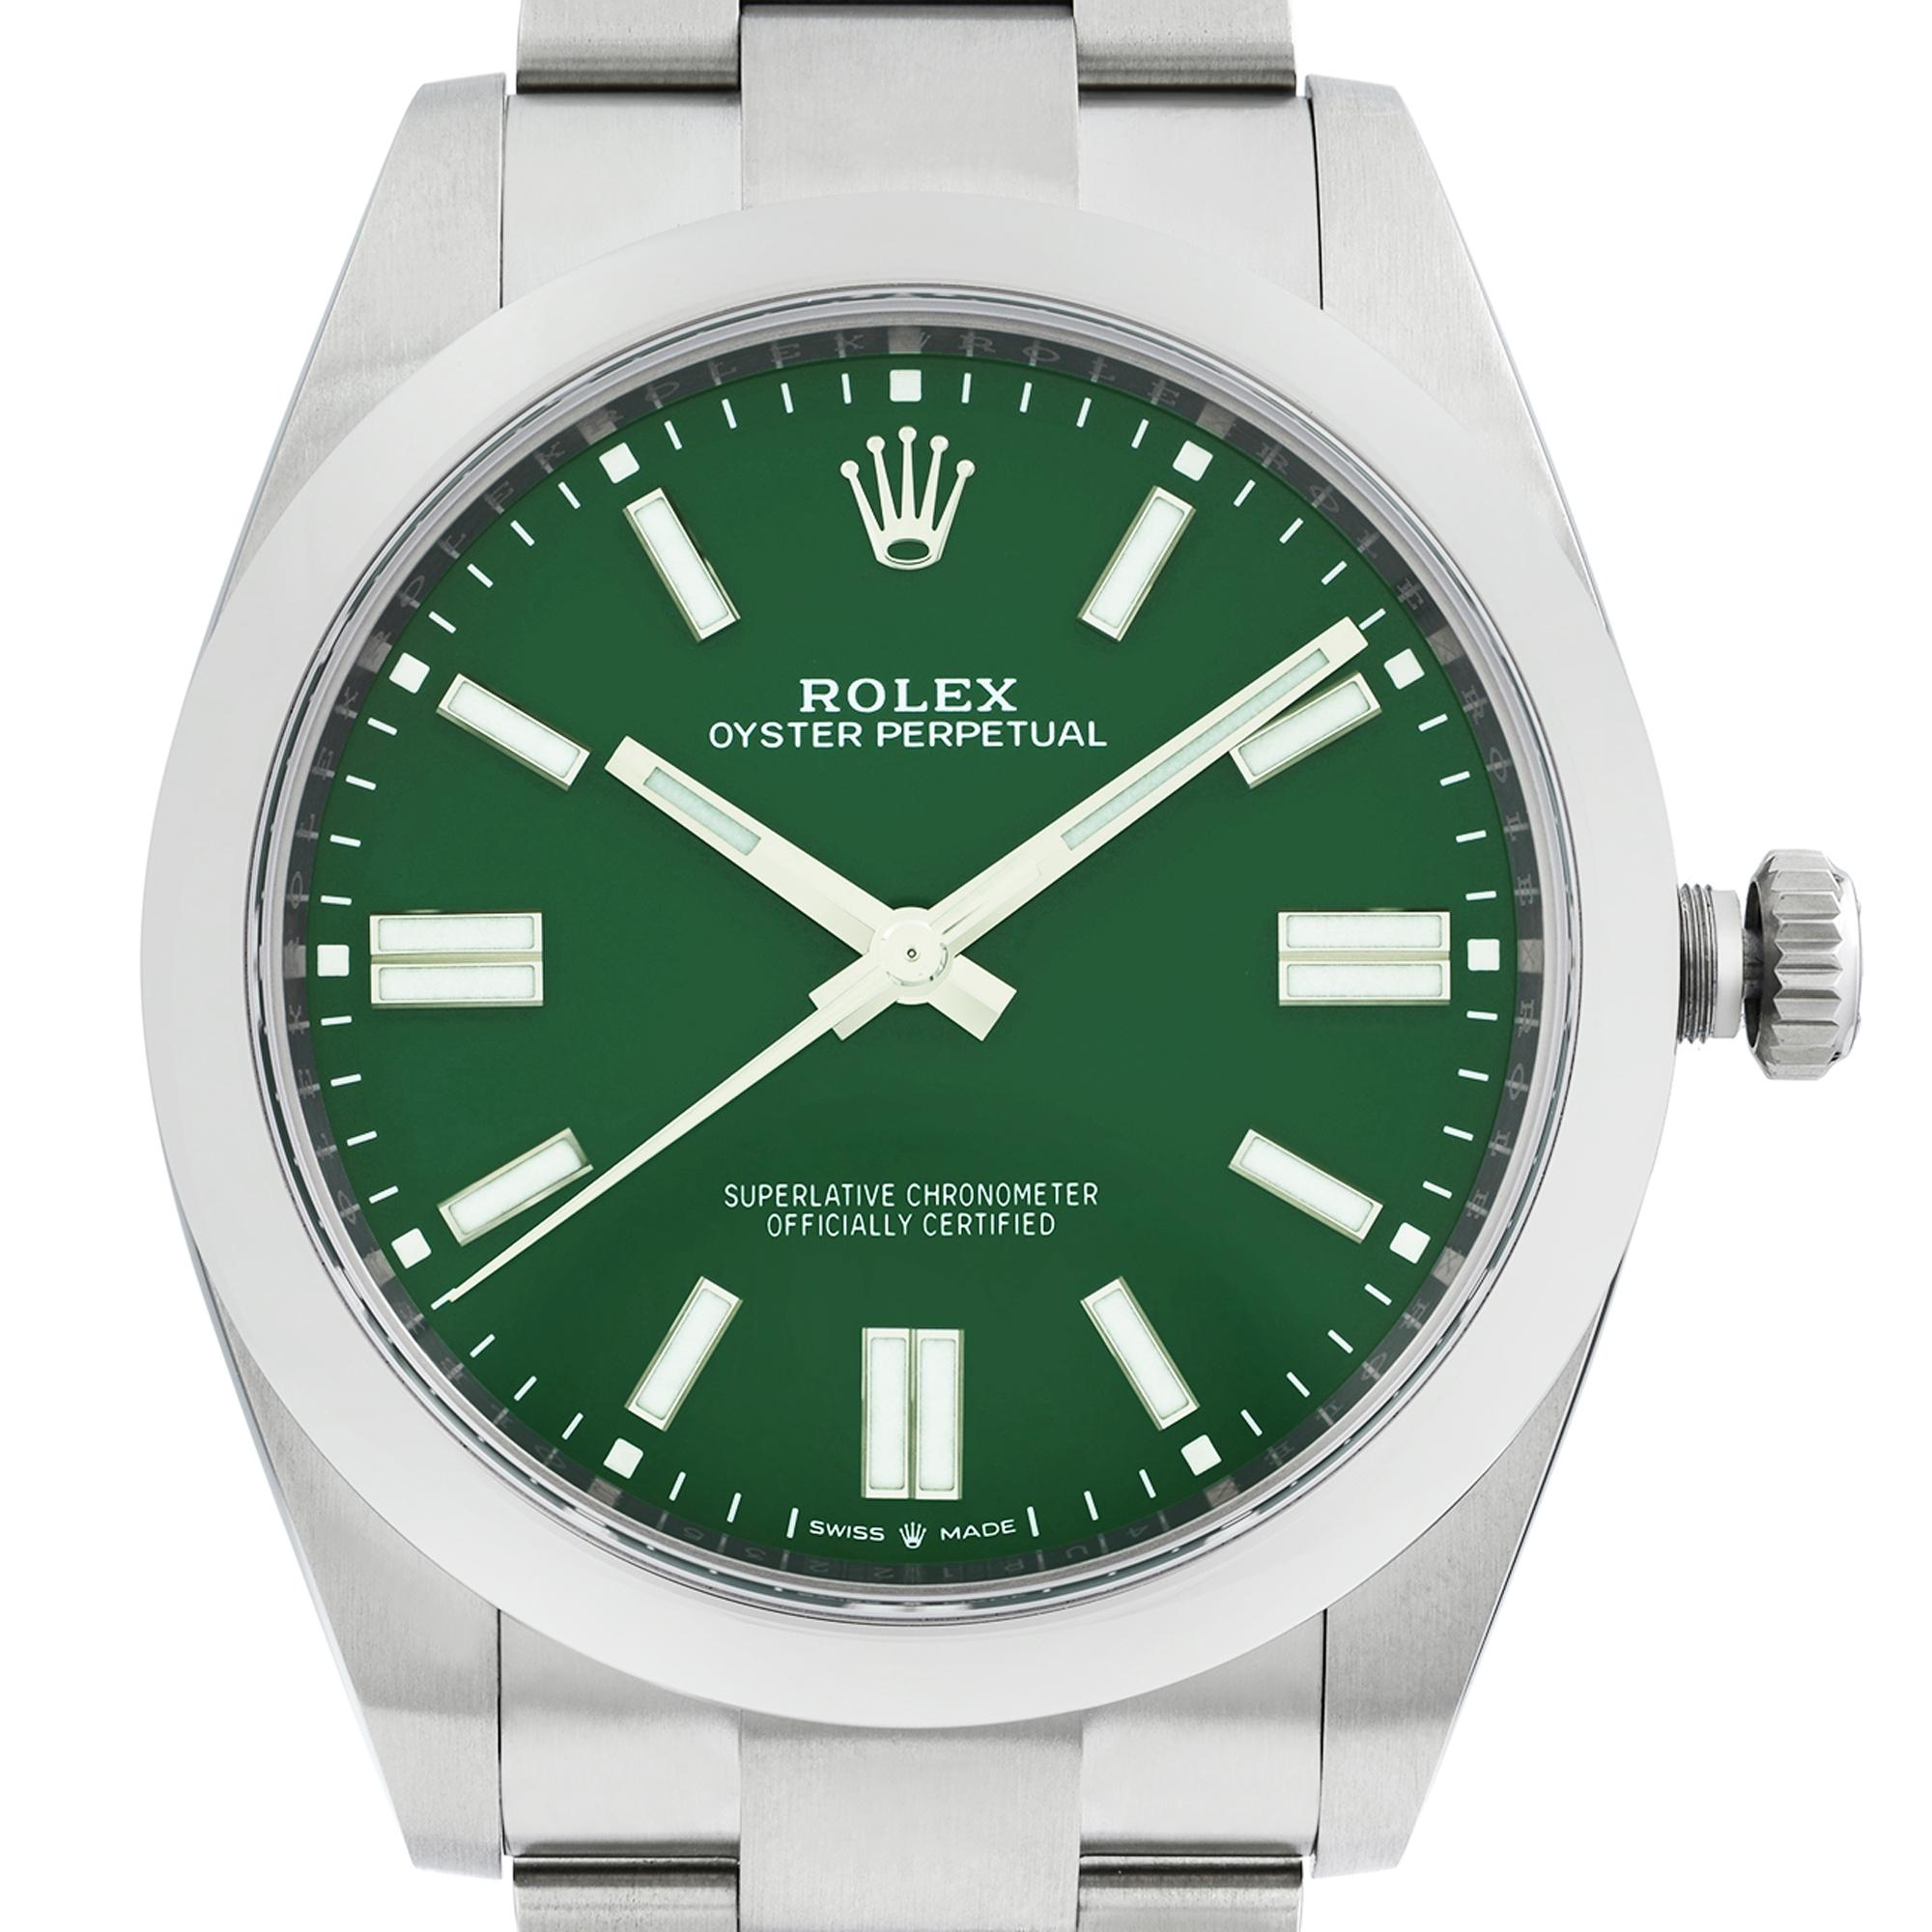 Unworn Rolex Oyster Perpetual 41 Steel Green Dial Automatic Mens Watch. Comes with Original Box and Papers. Covered By 3 Year Chronostore Warranty.
Details:
Brand Rolex
Color Green
Department Men
Model Number 124300
Model Rolex Oyster